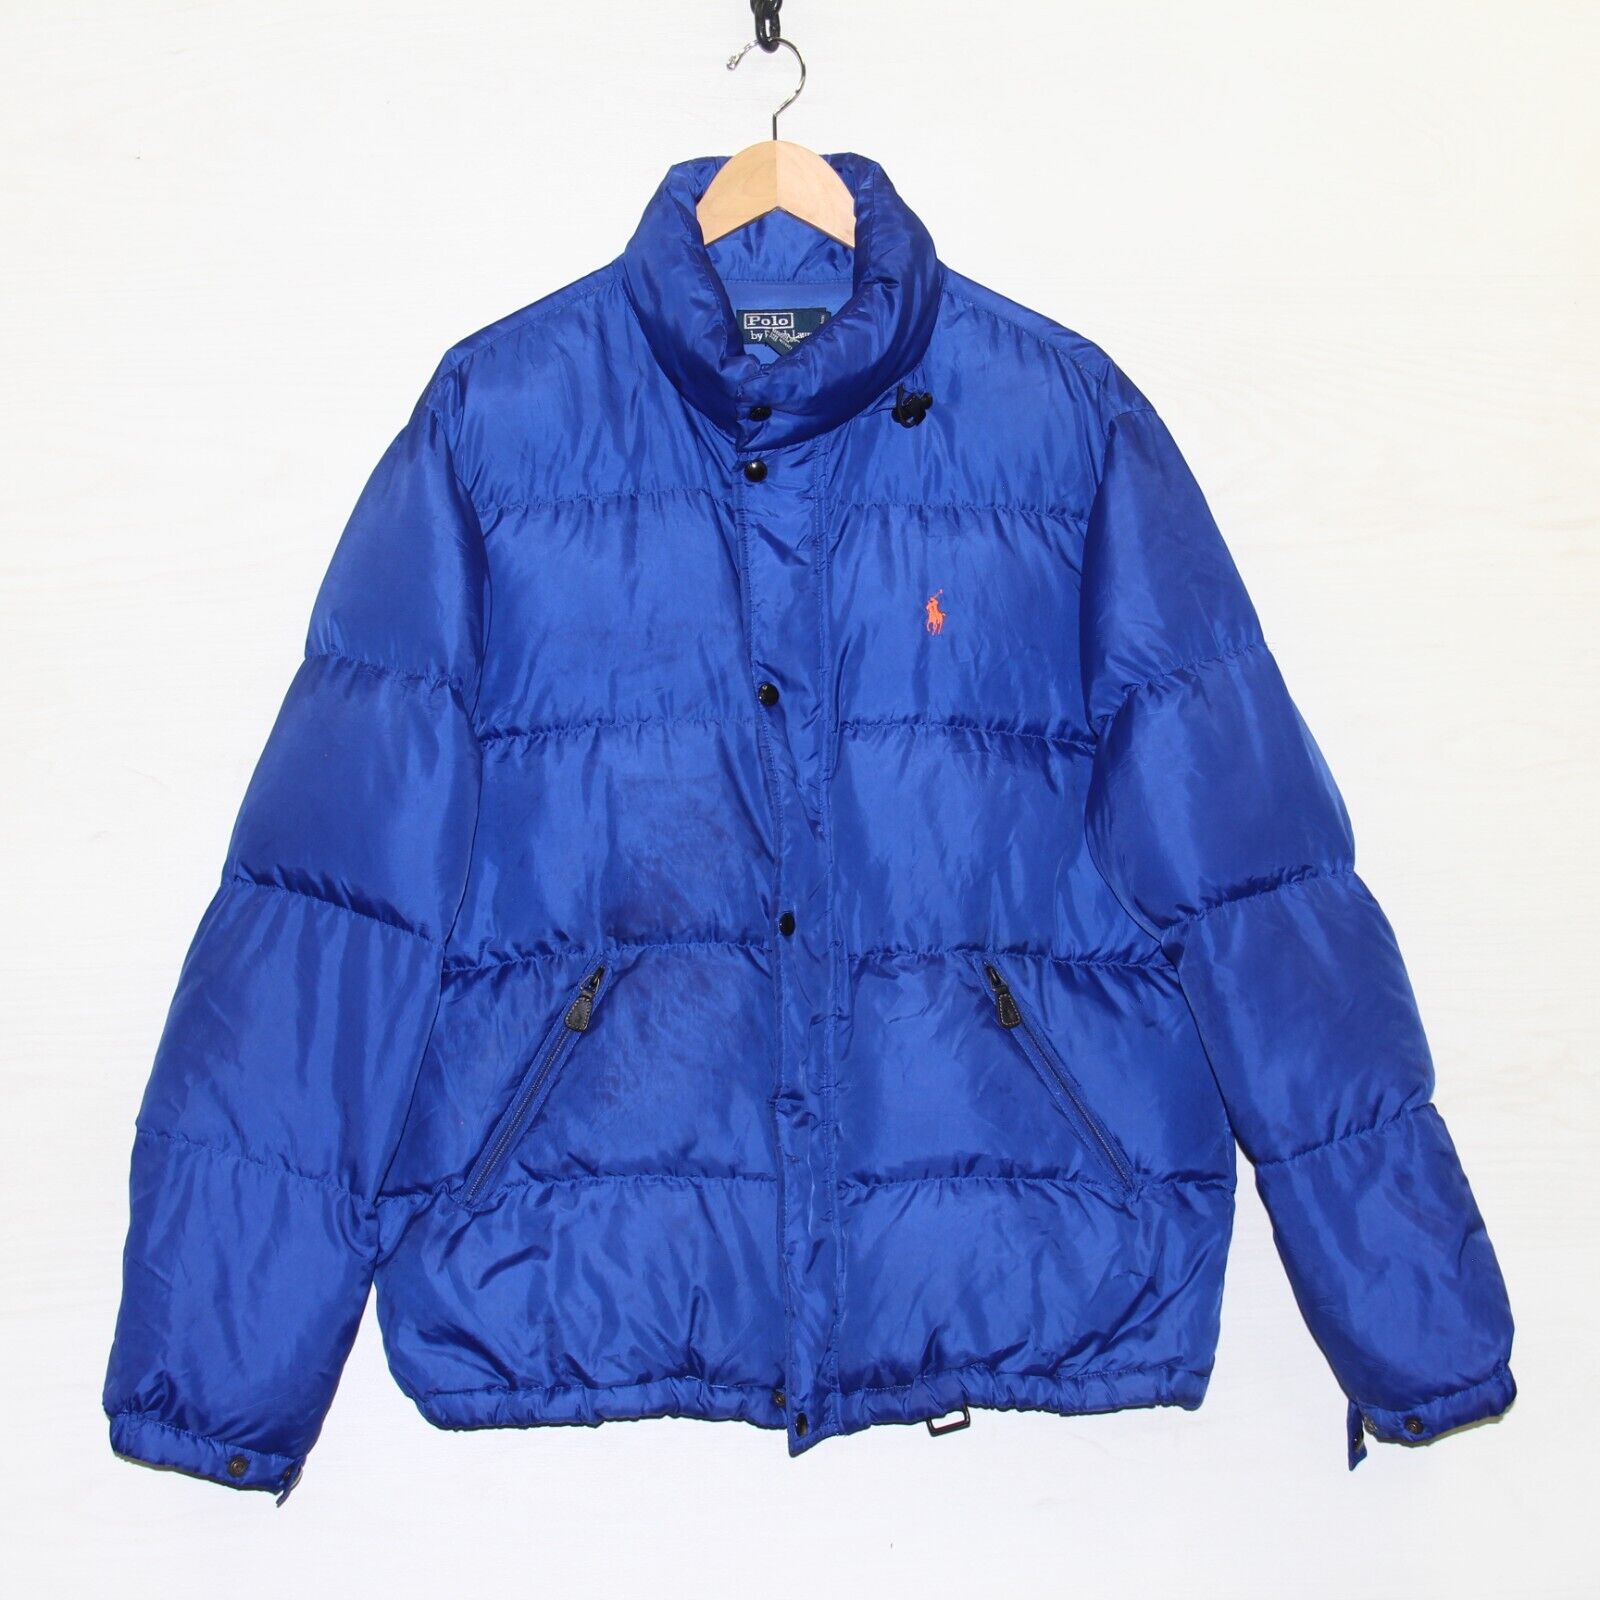 Vintage Polo Ralph Lauren Puffer Jacket Size Large Blue Waterfowl Insulated  90s